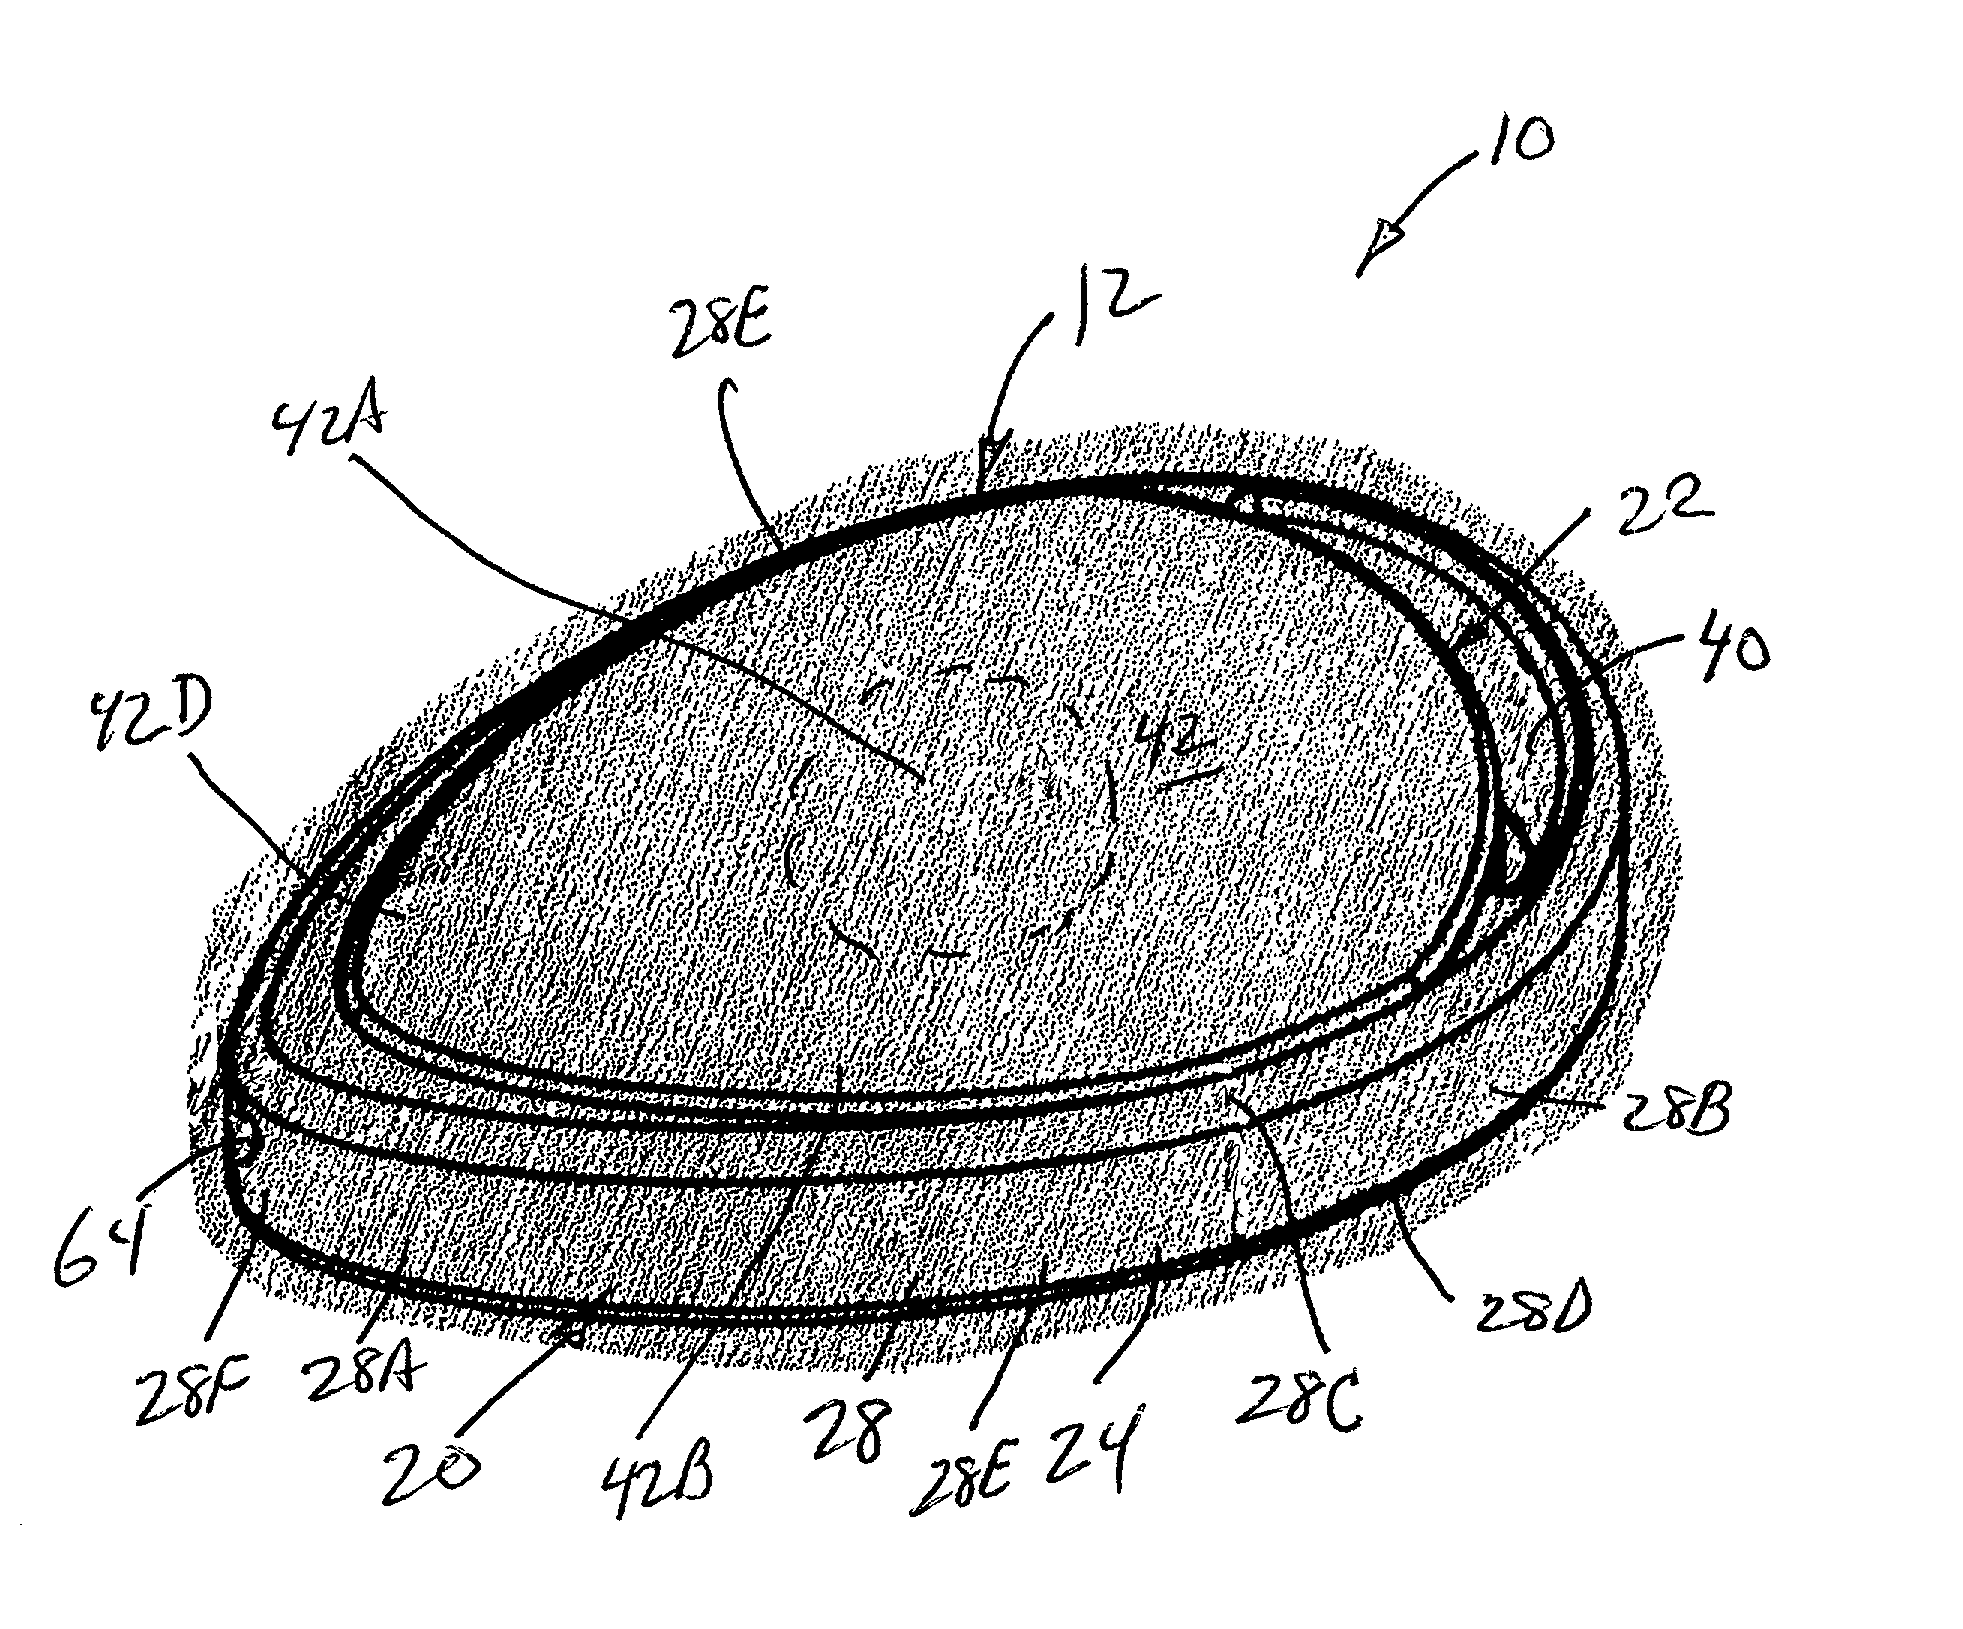 Miniature flashlight device having housing with outer and inner enclosures